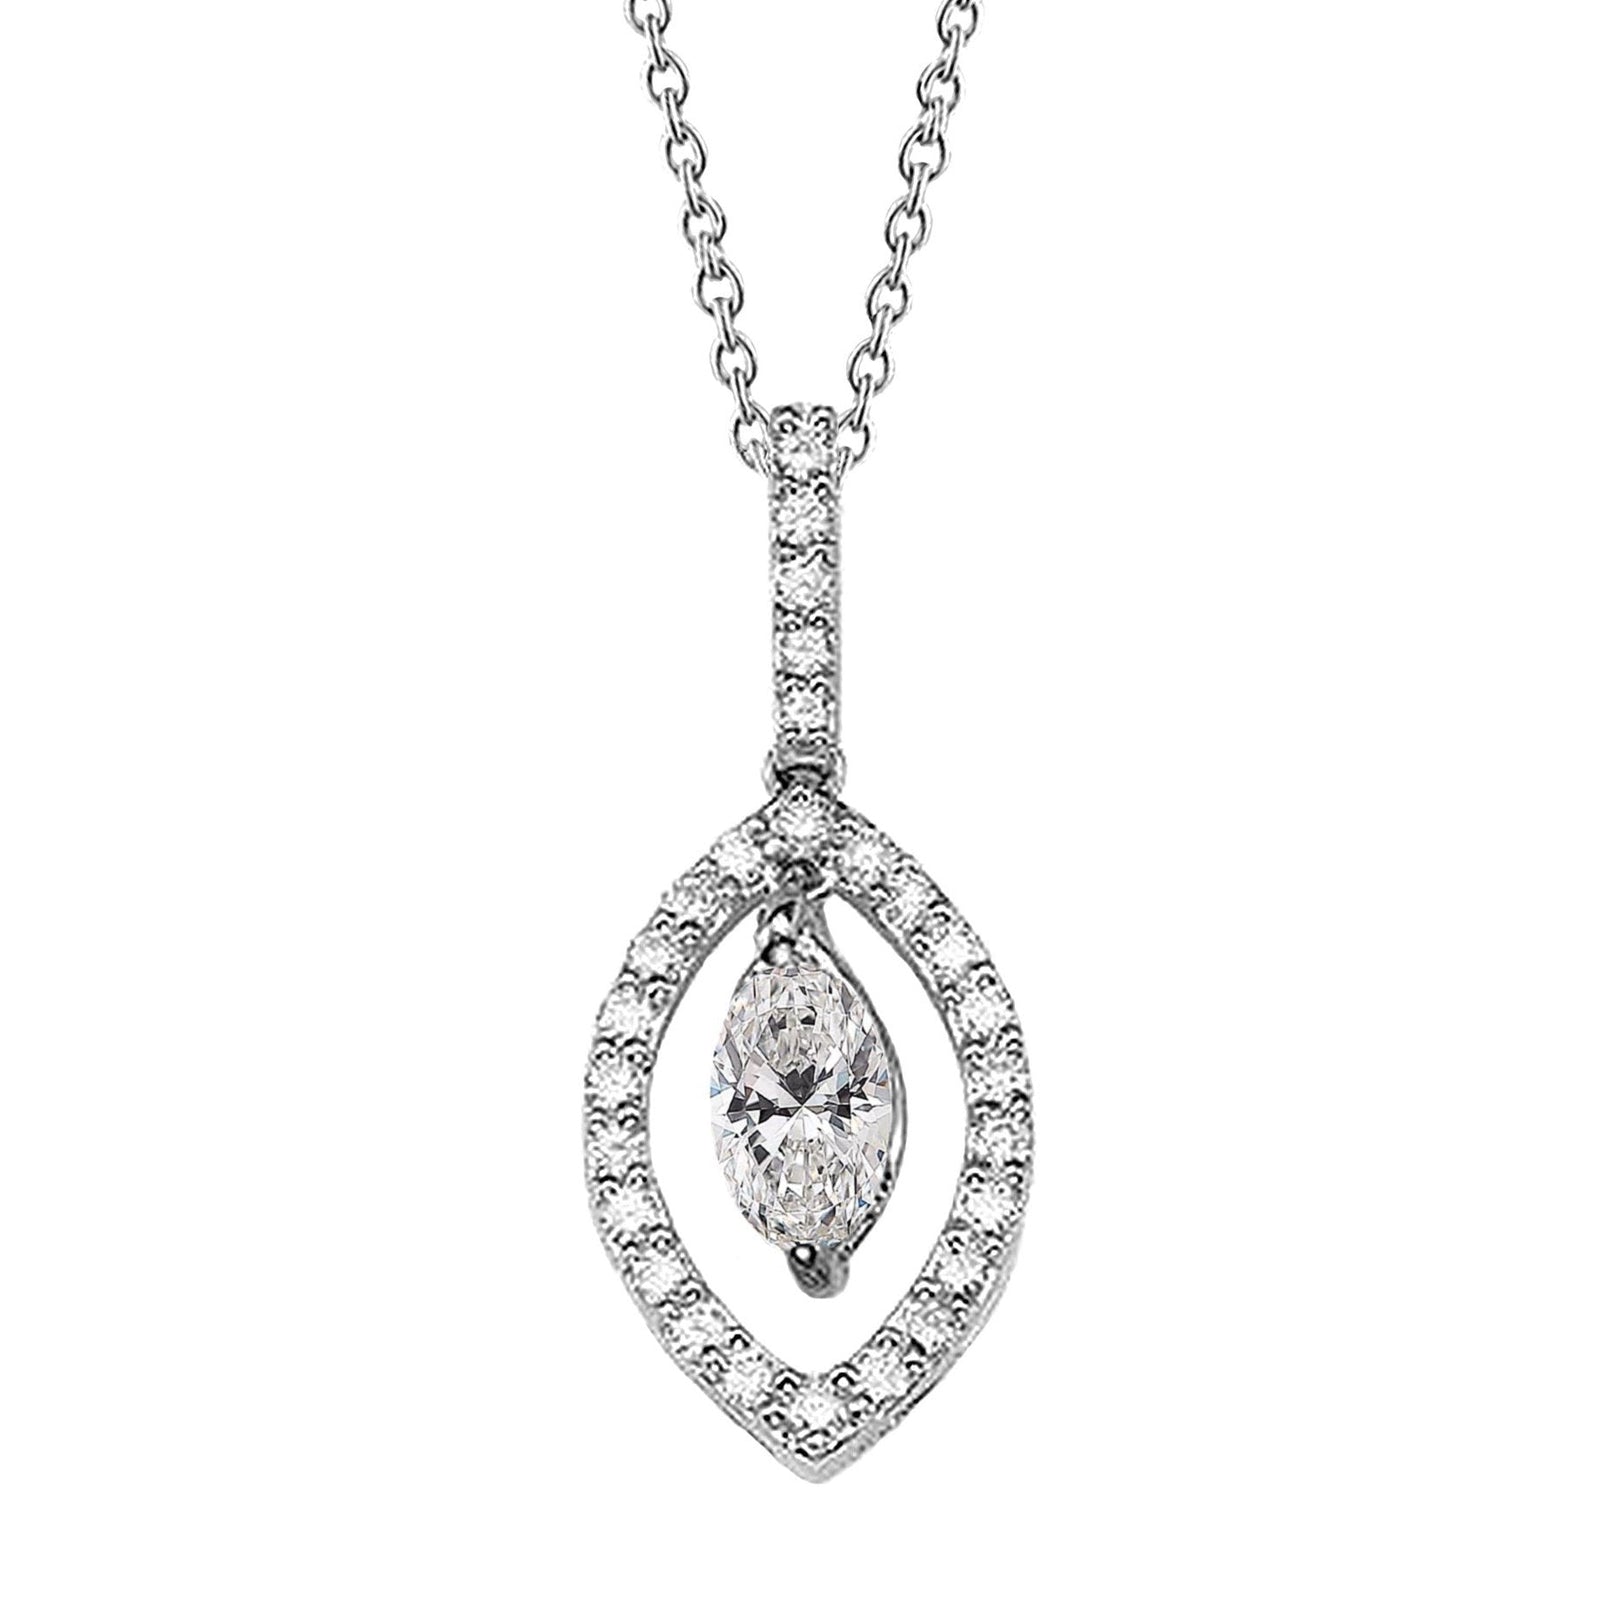 Genuine Diamonds Pendant Necklace With Chain 2.15 Carats Gold White 14K